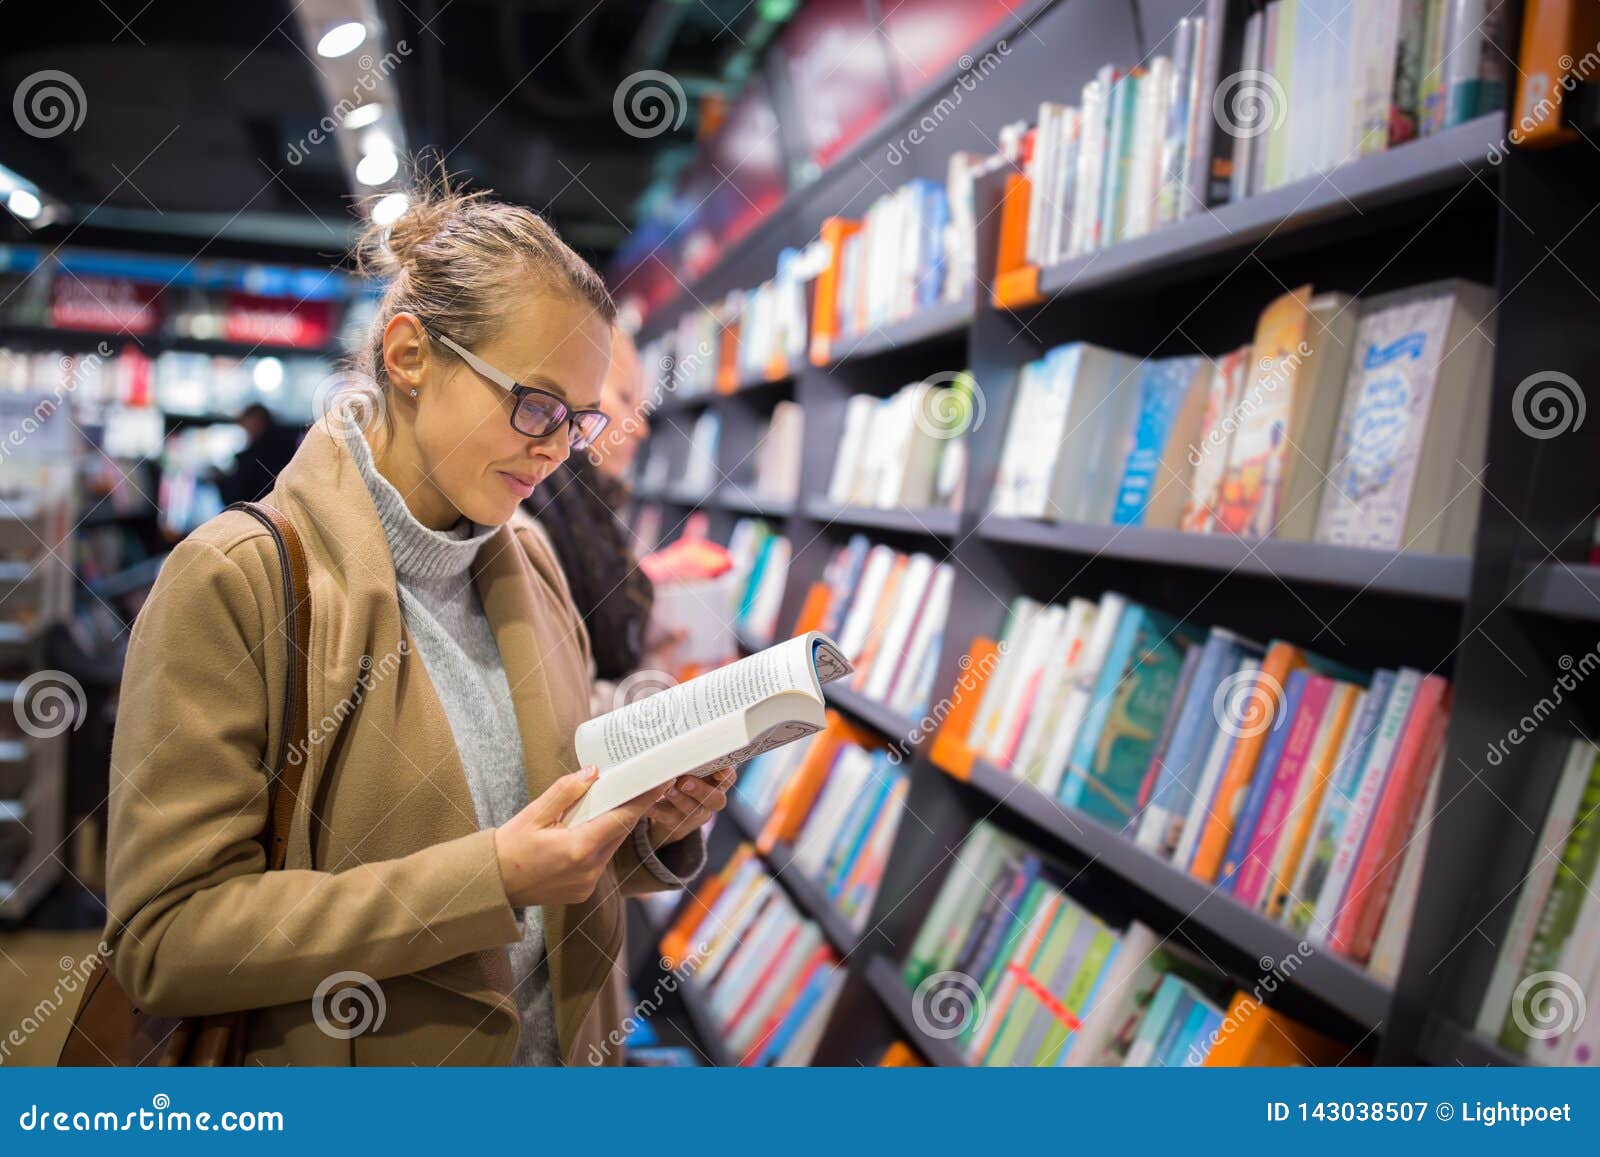 pretty, young female choosing a good book to buy